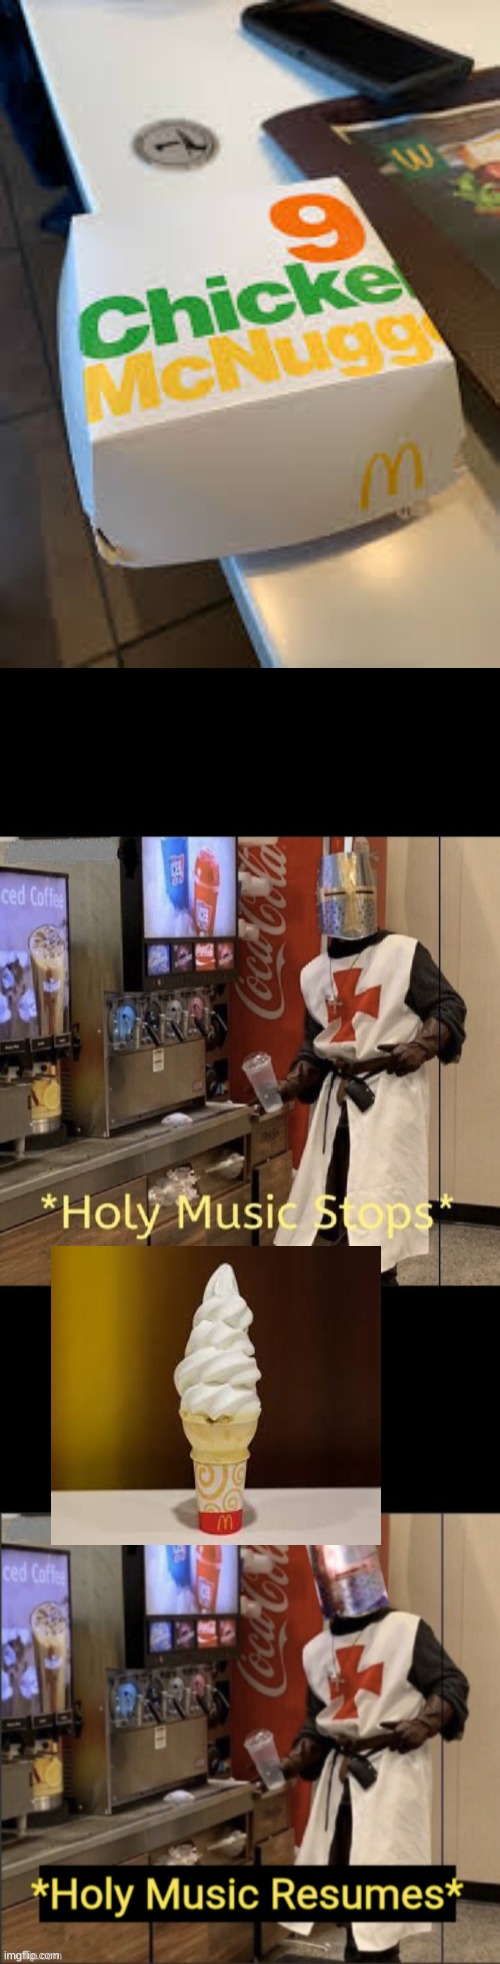 image tagged in holy music stops holy music resumes | made w/ Imgflip meme maker